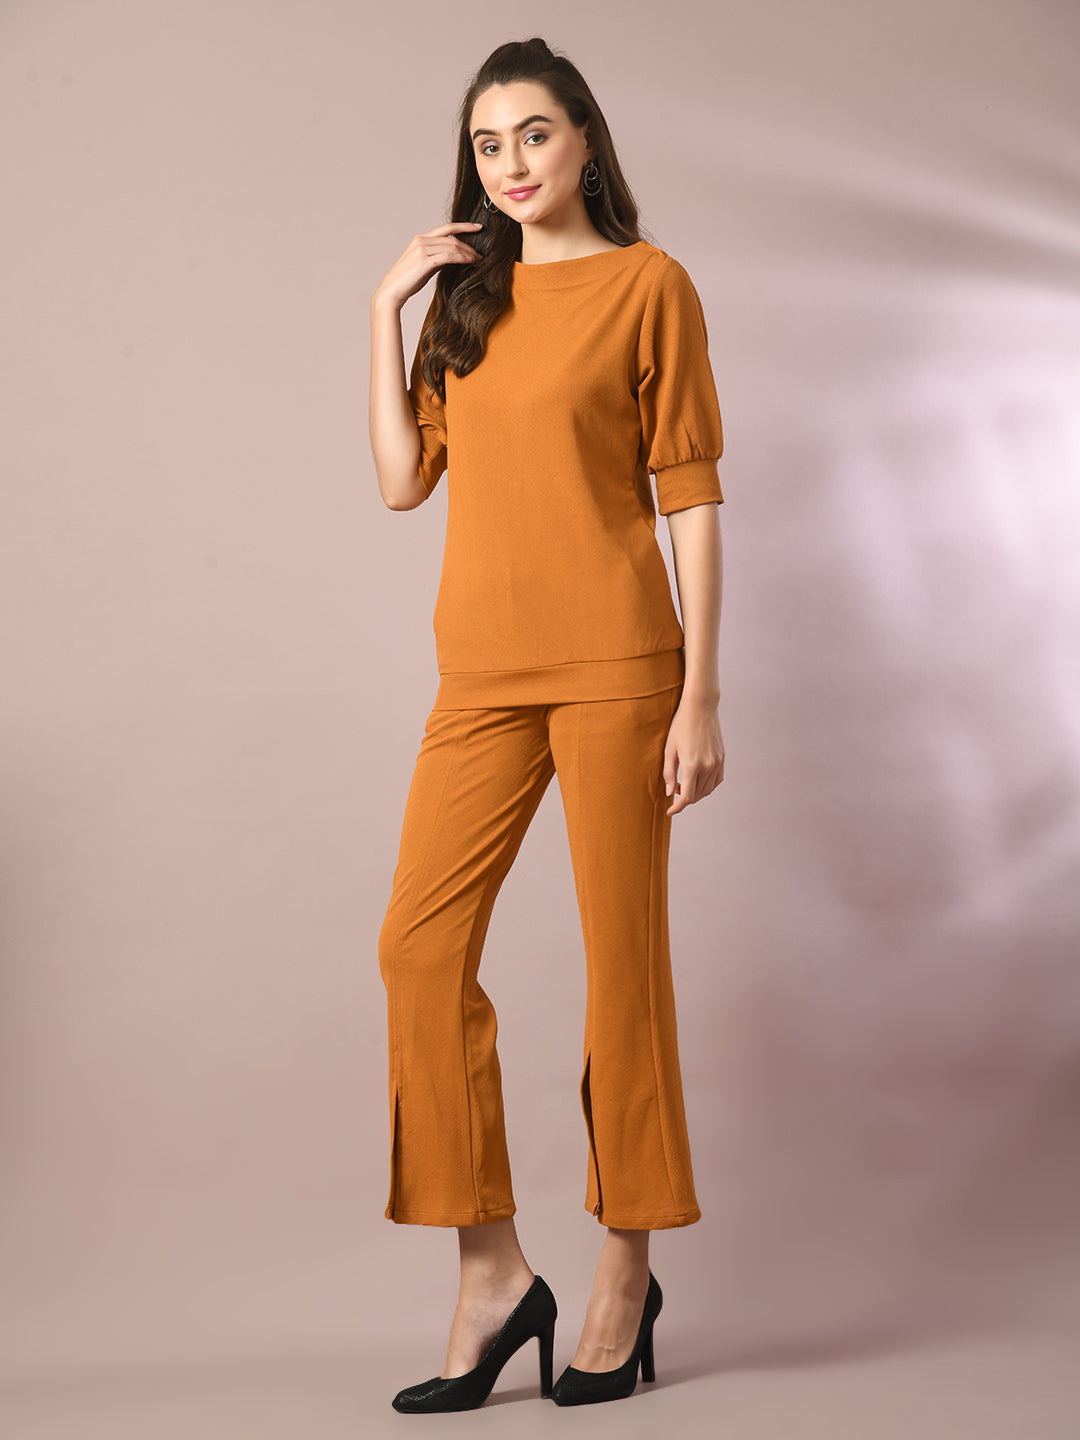 Women's  Mustard Solid Party Parallel Trousers   - Myshka